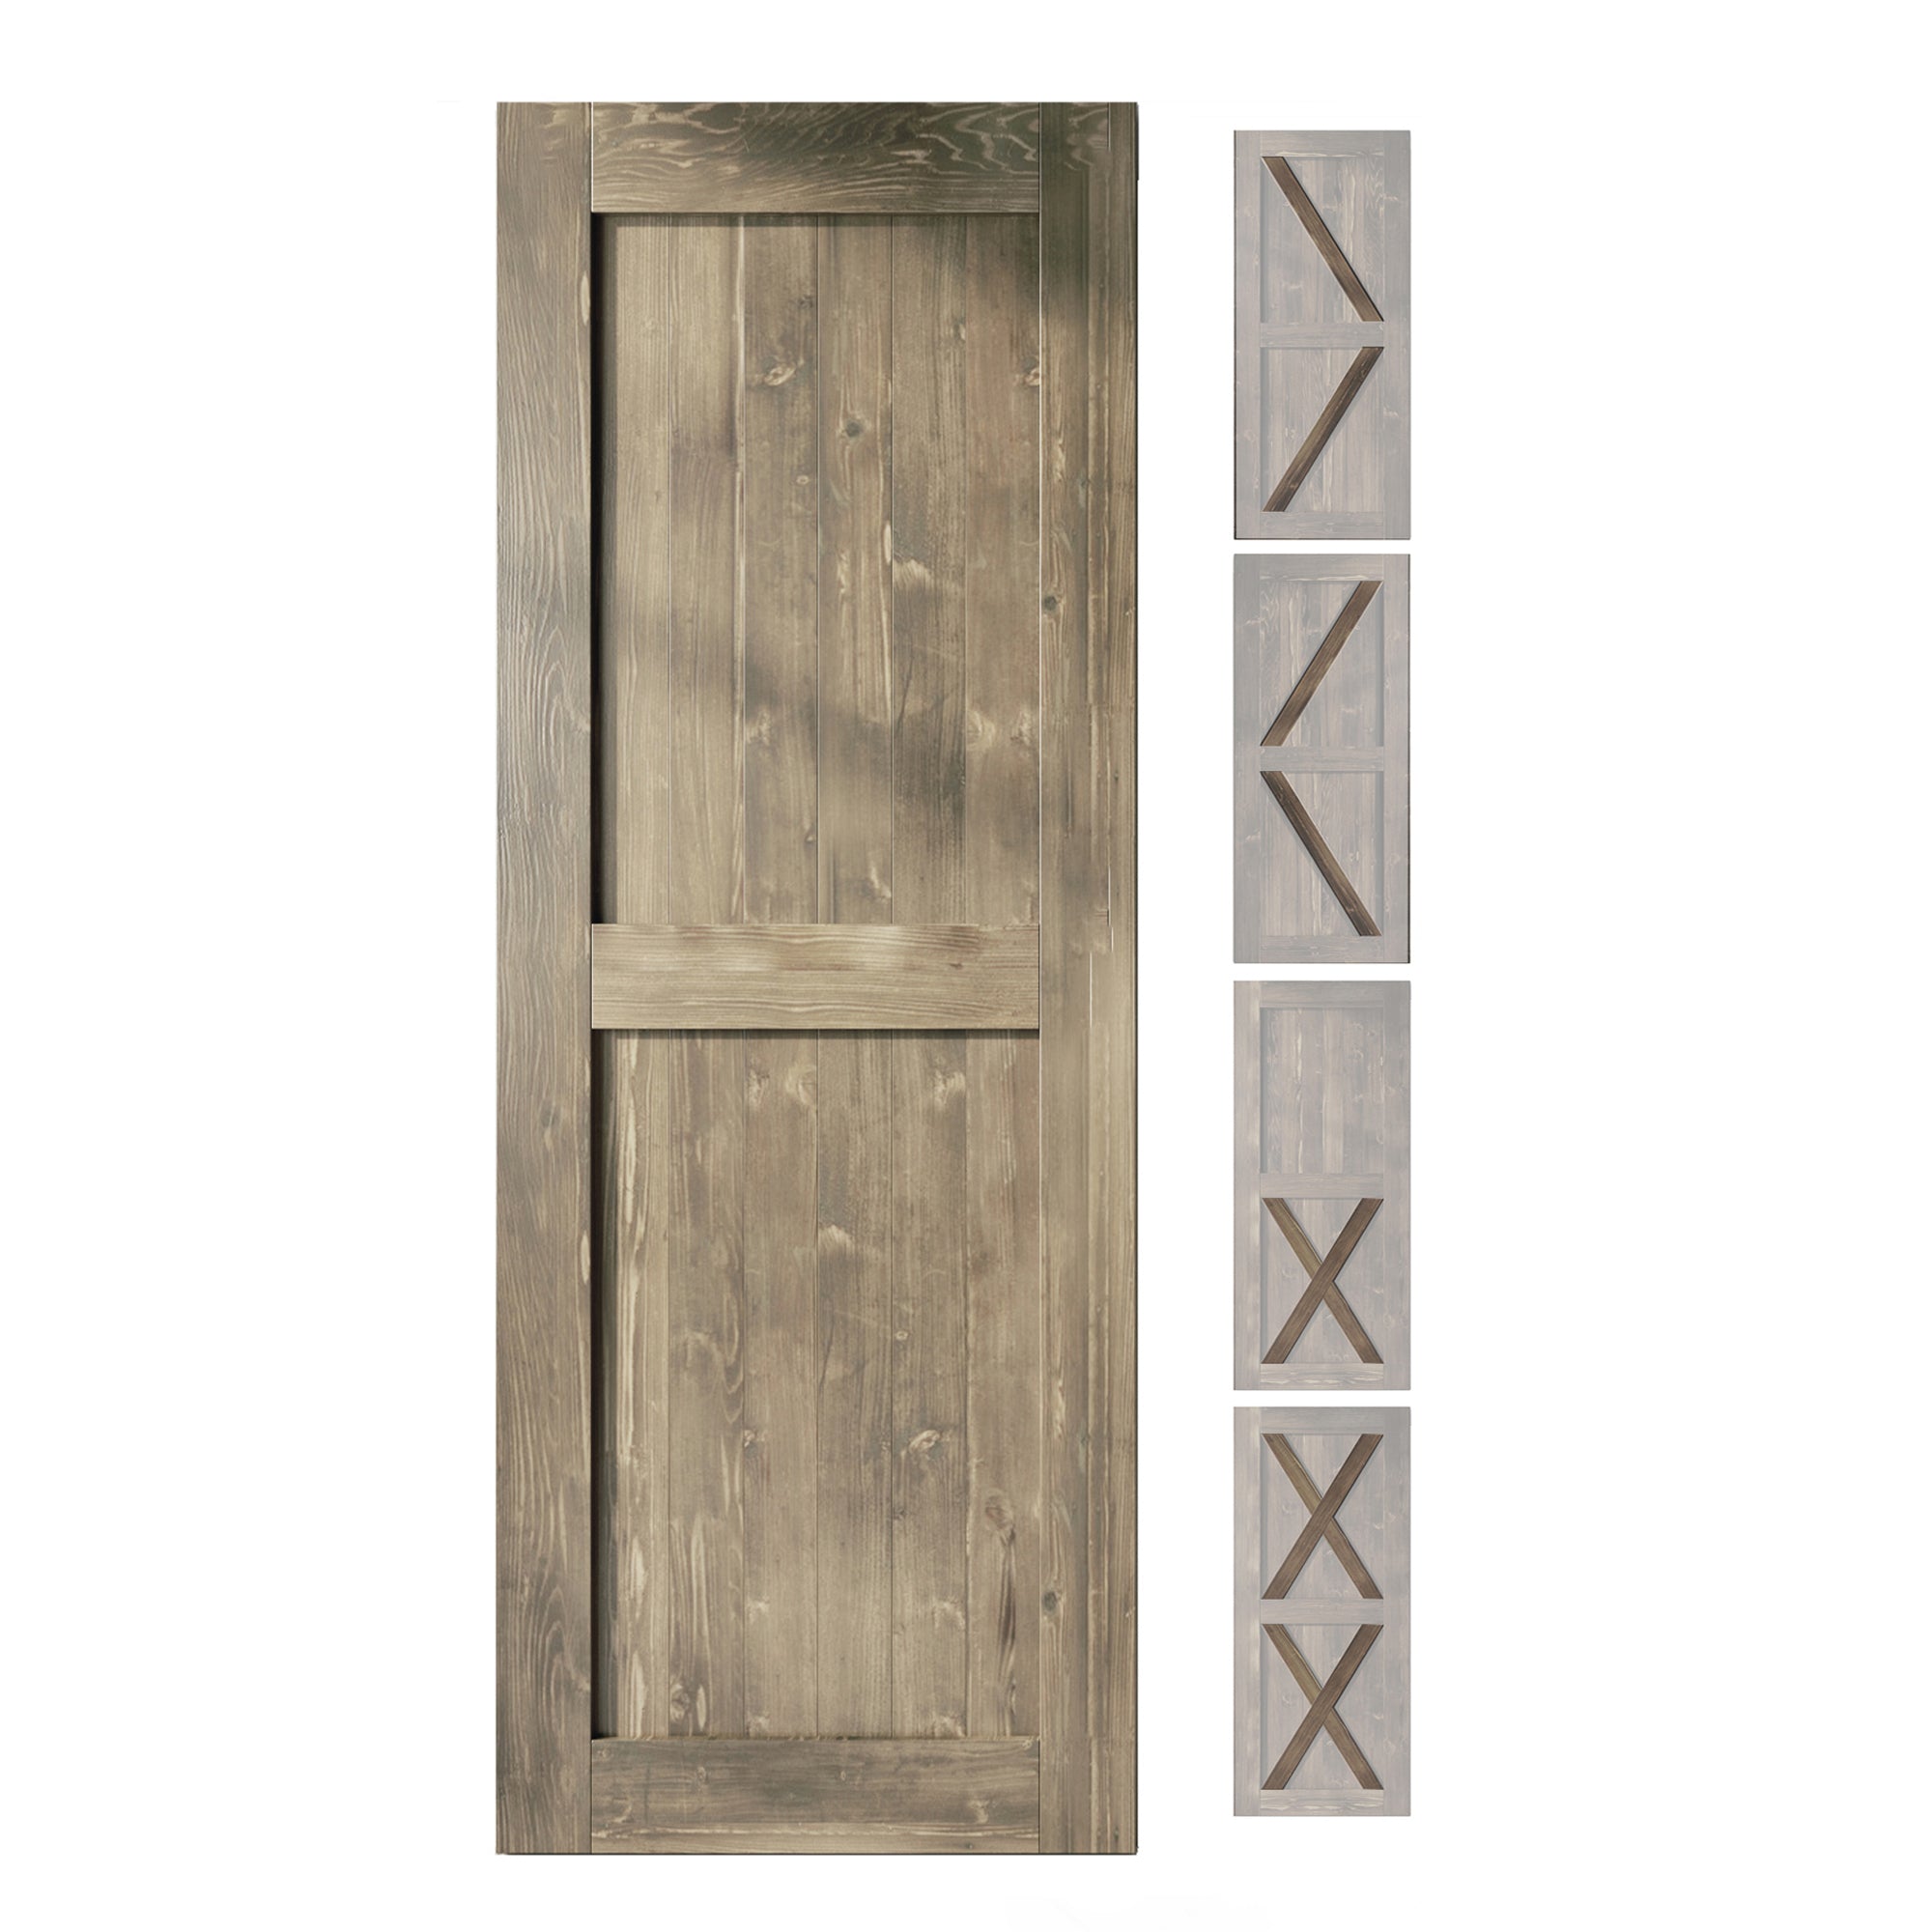 84" Height Finished & Unassembled 5-in-1 Design Wood Barn Door